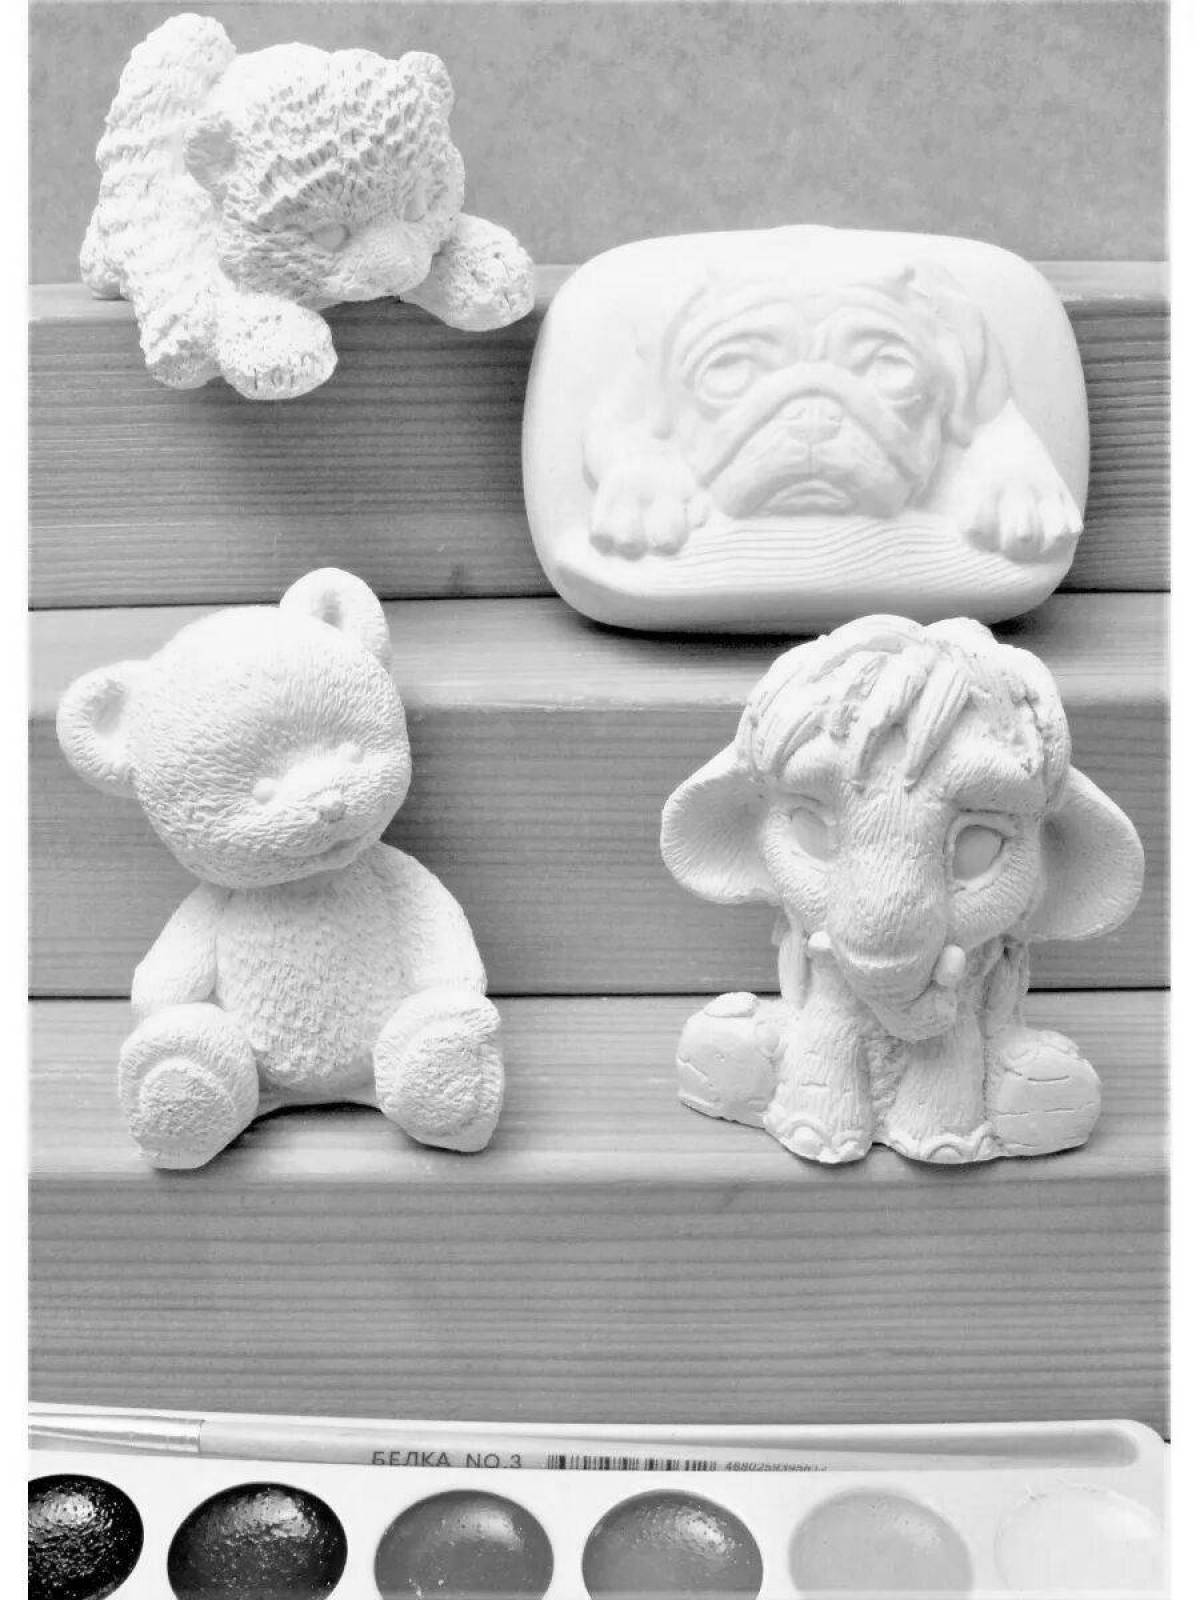 Playful coloring plaster figurines